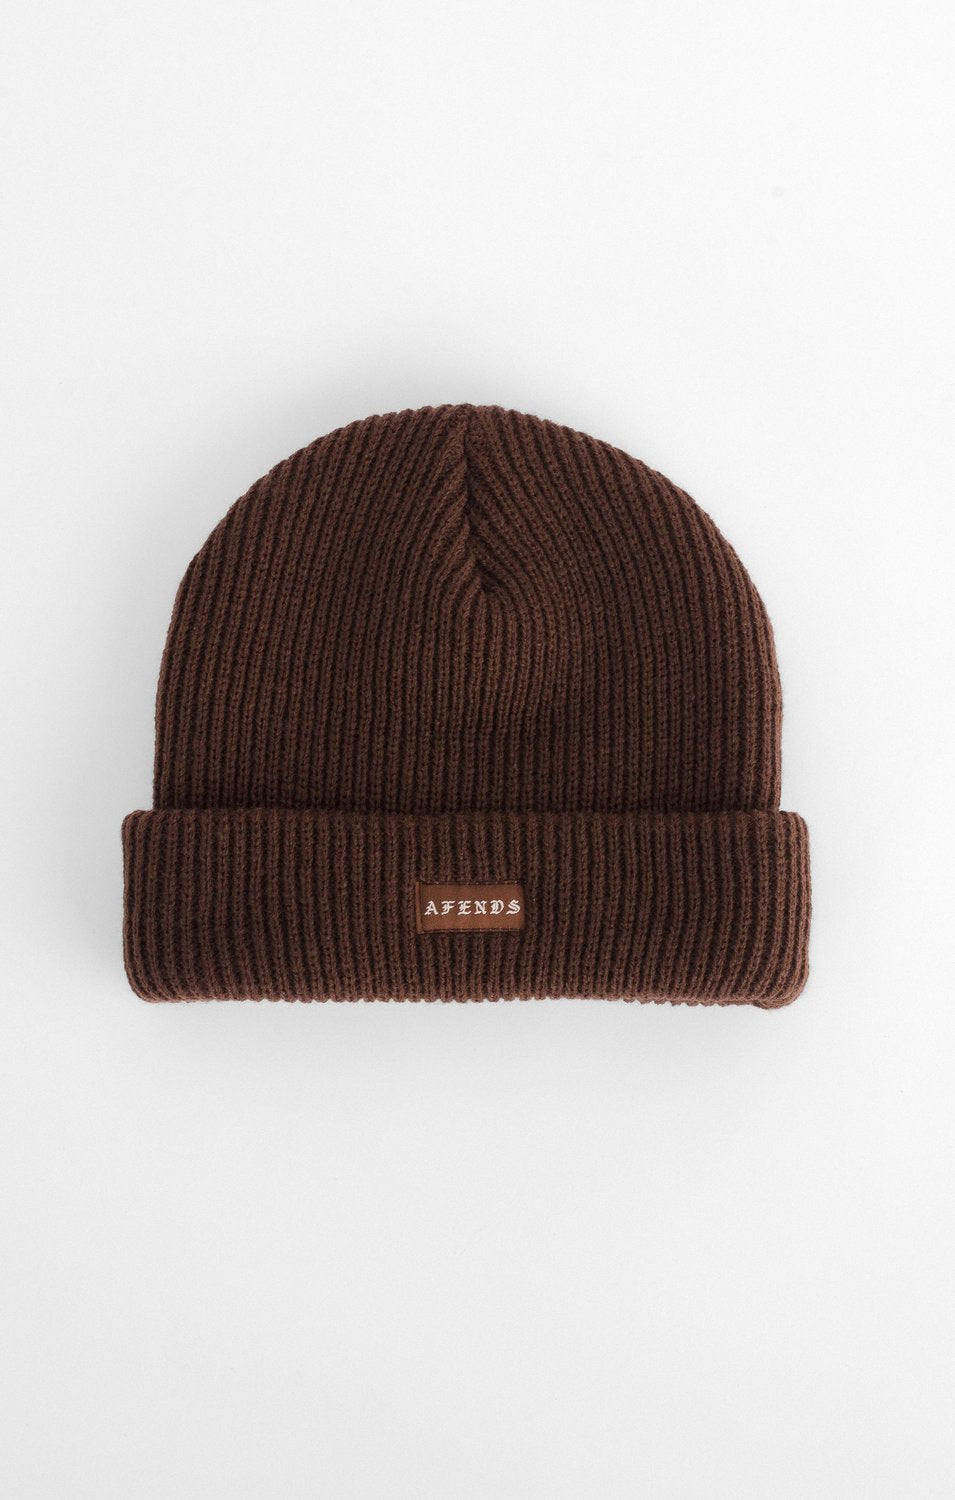 Afends Core Beanie - Brown - Forestwood Co